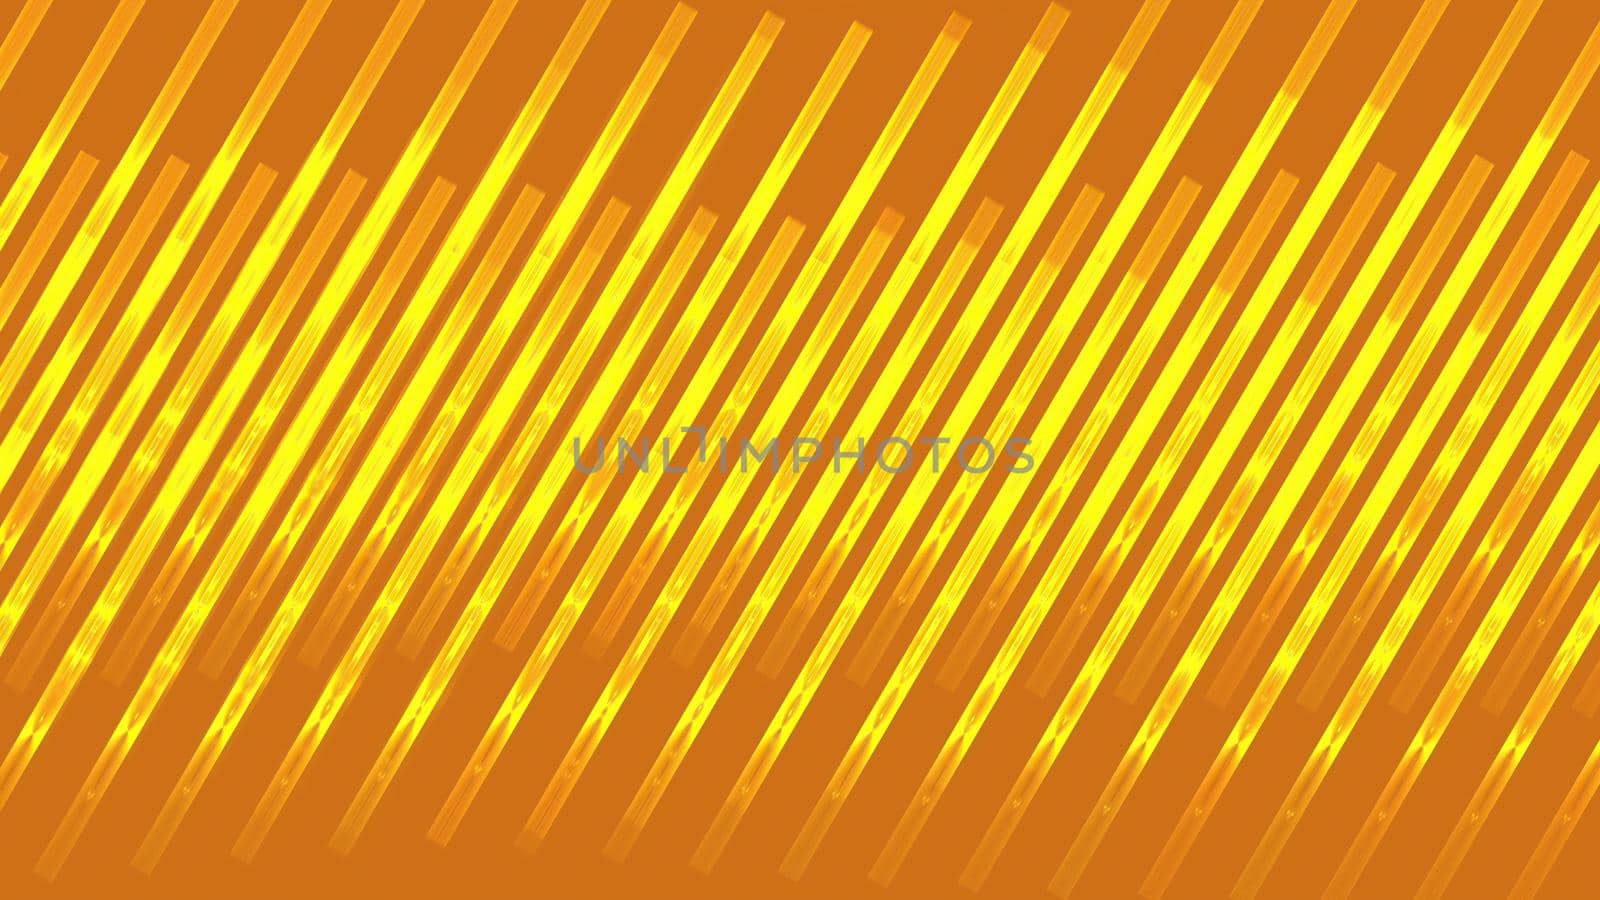 3d illustration - Unique Design of Abstract Colorful  striped surface